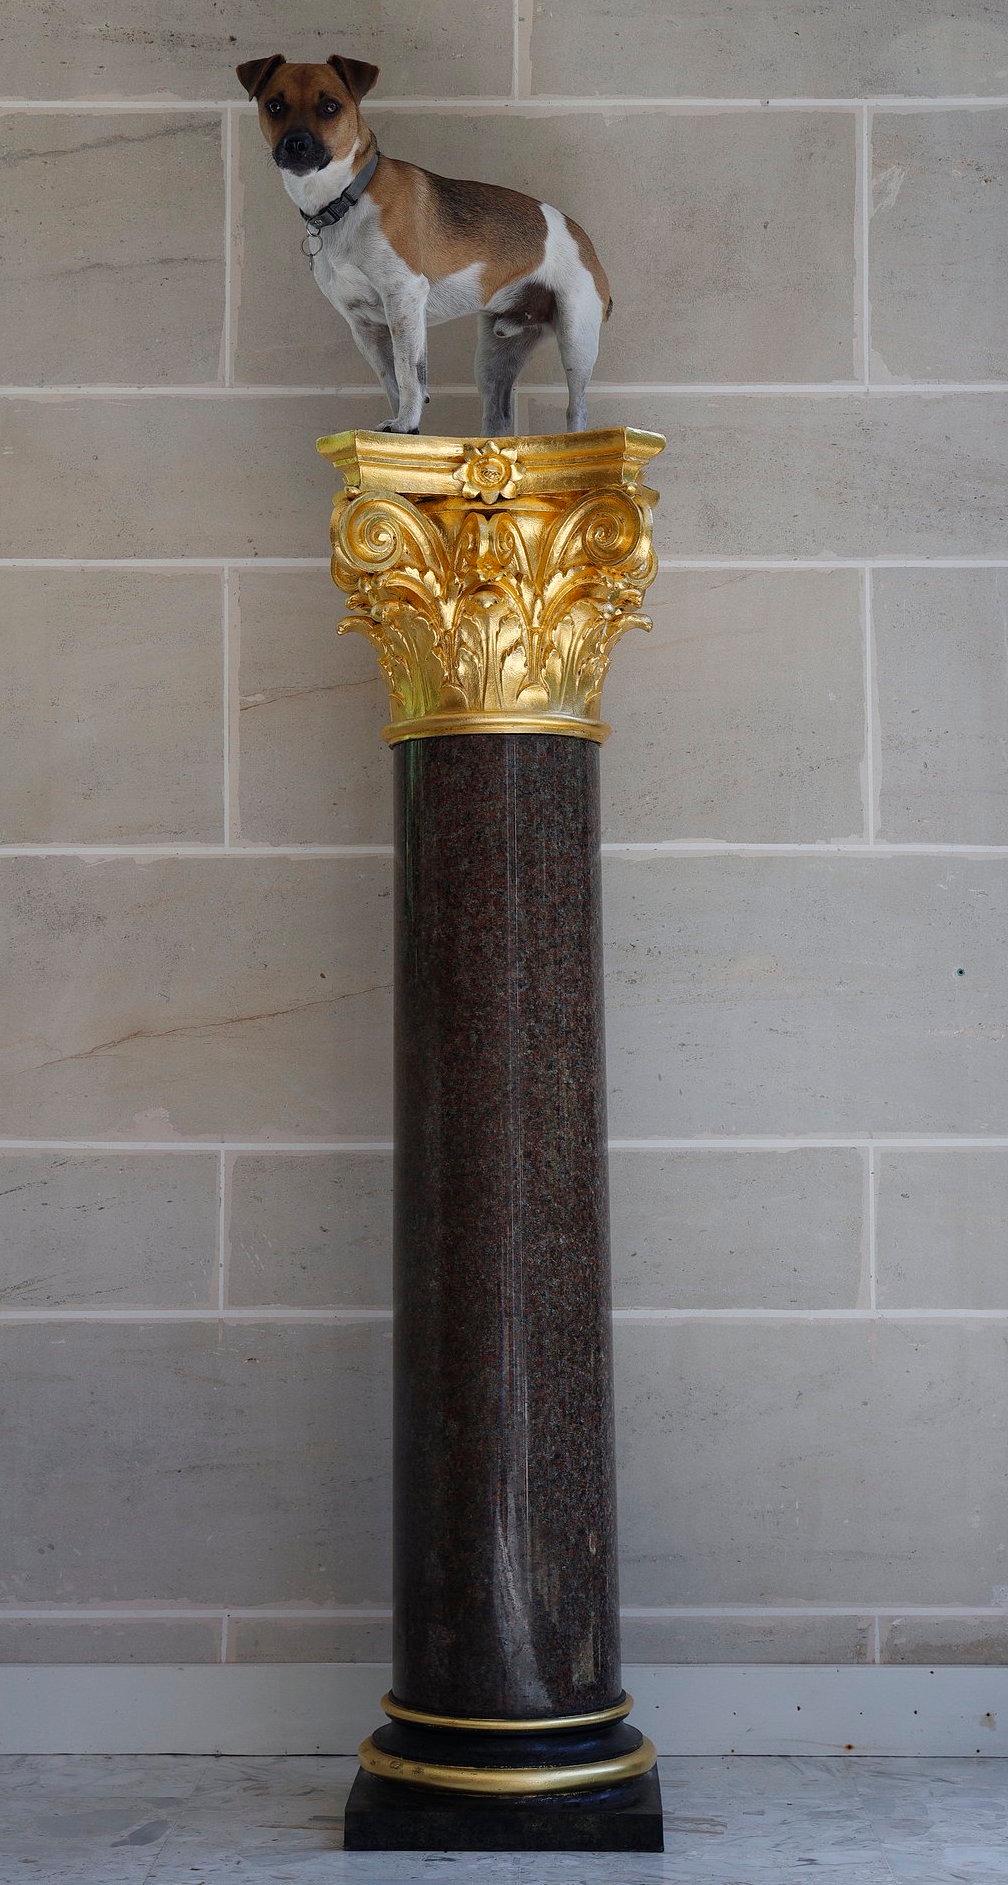 Large red granite and patinated bronze column in Neoclassical style, with Corinthian capital. It is set on a circular, terraced base above a square plinth. 20th century French work.

